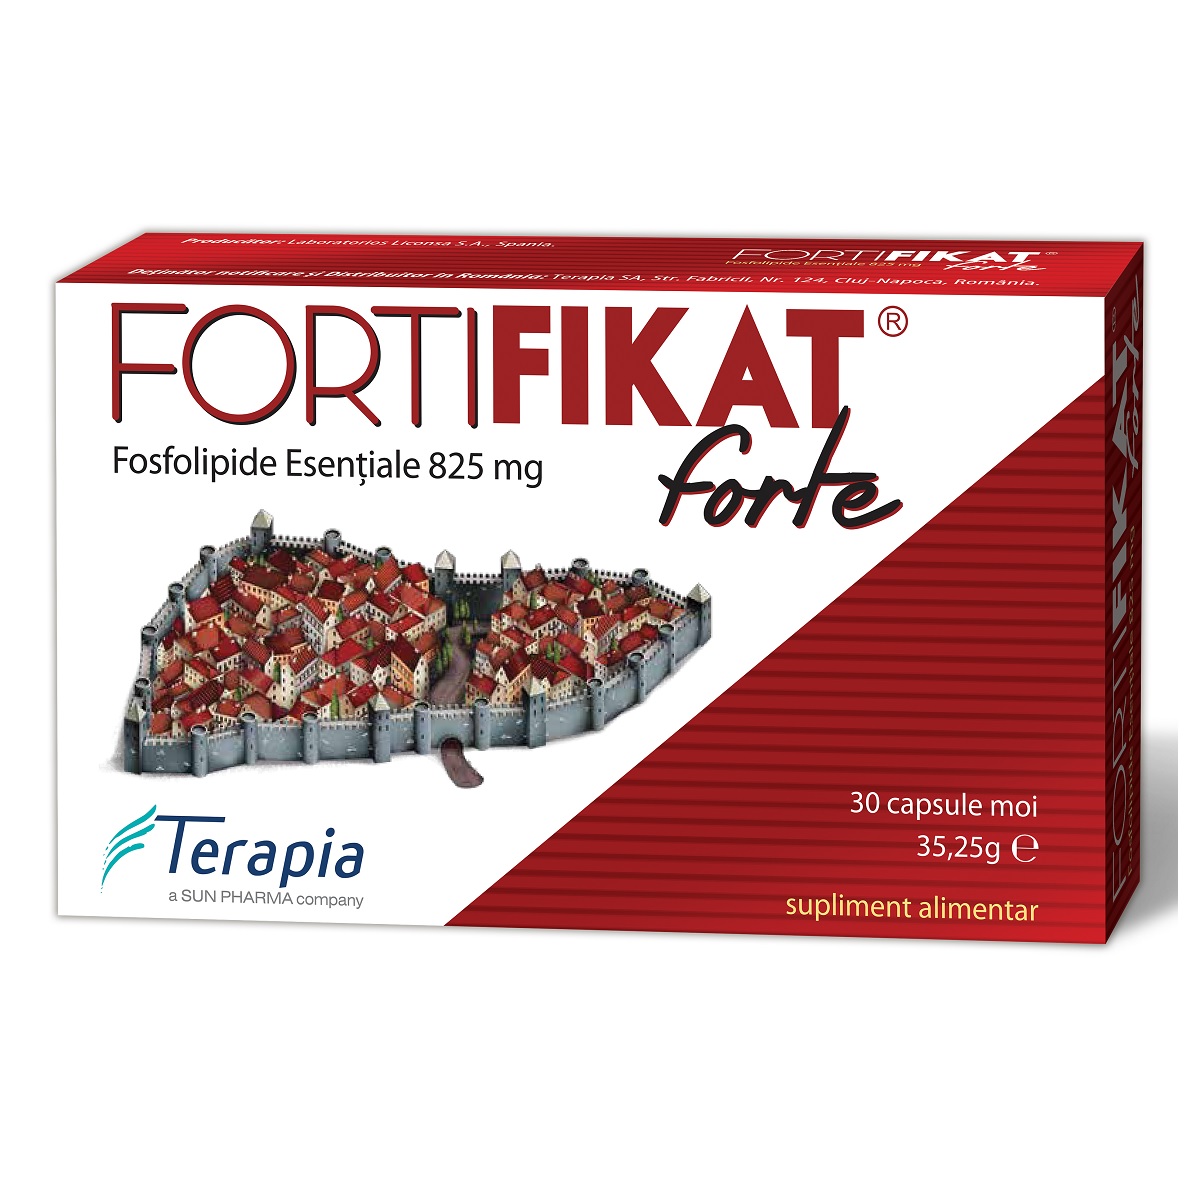 FORTIFIKAT FORTE 825 MG X 30 CPS.MOI